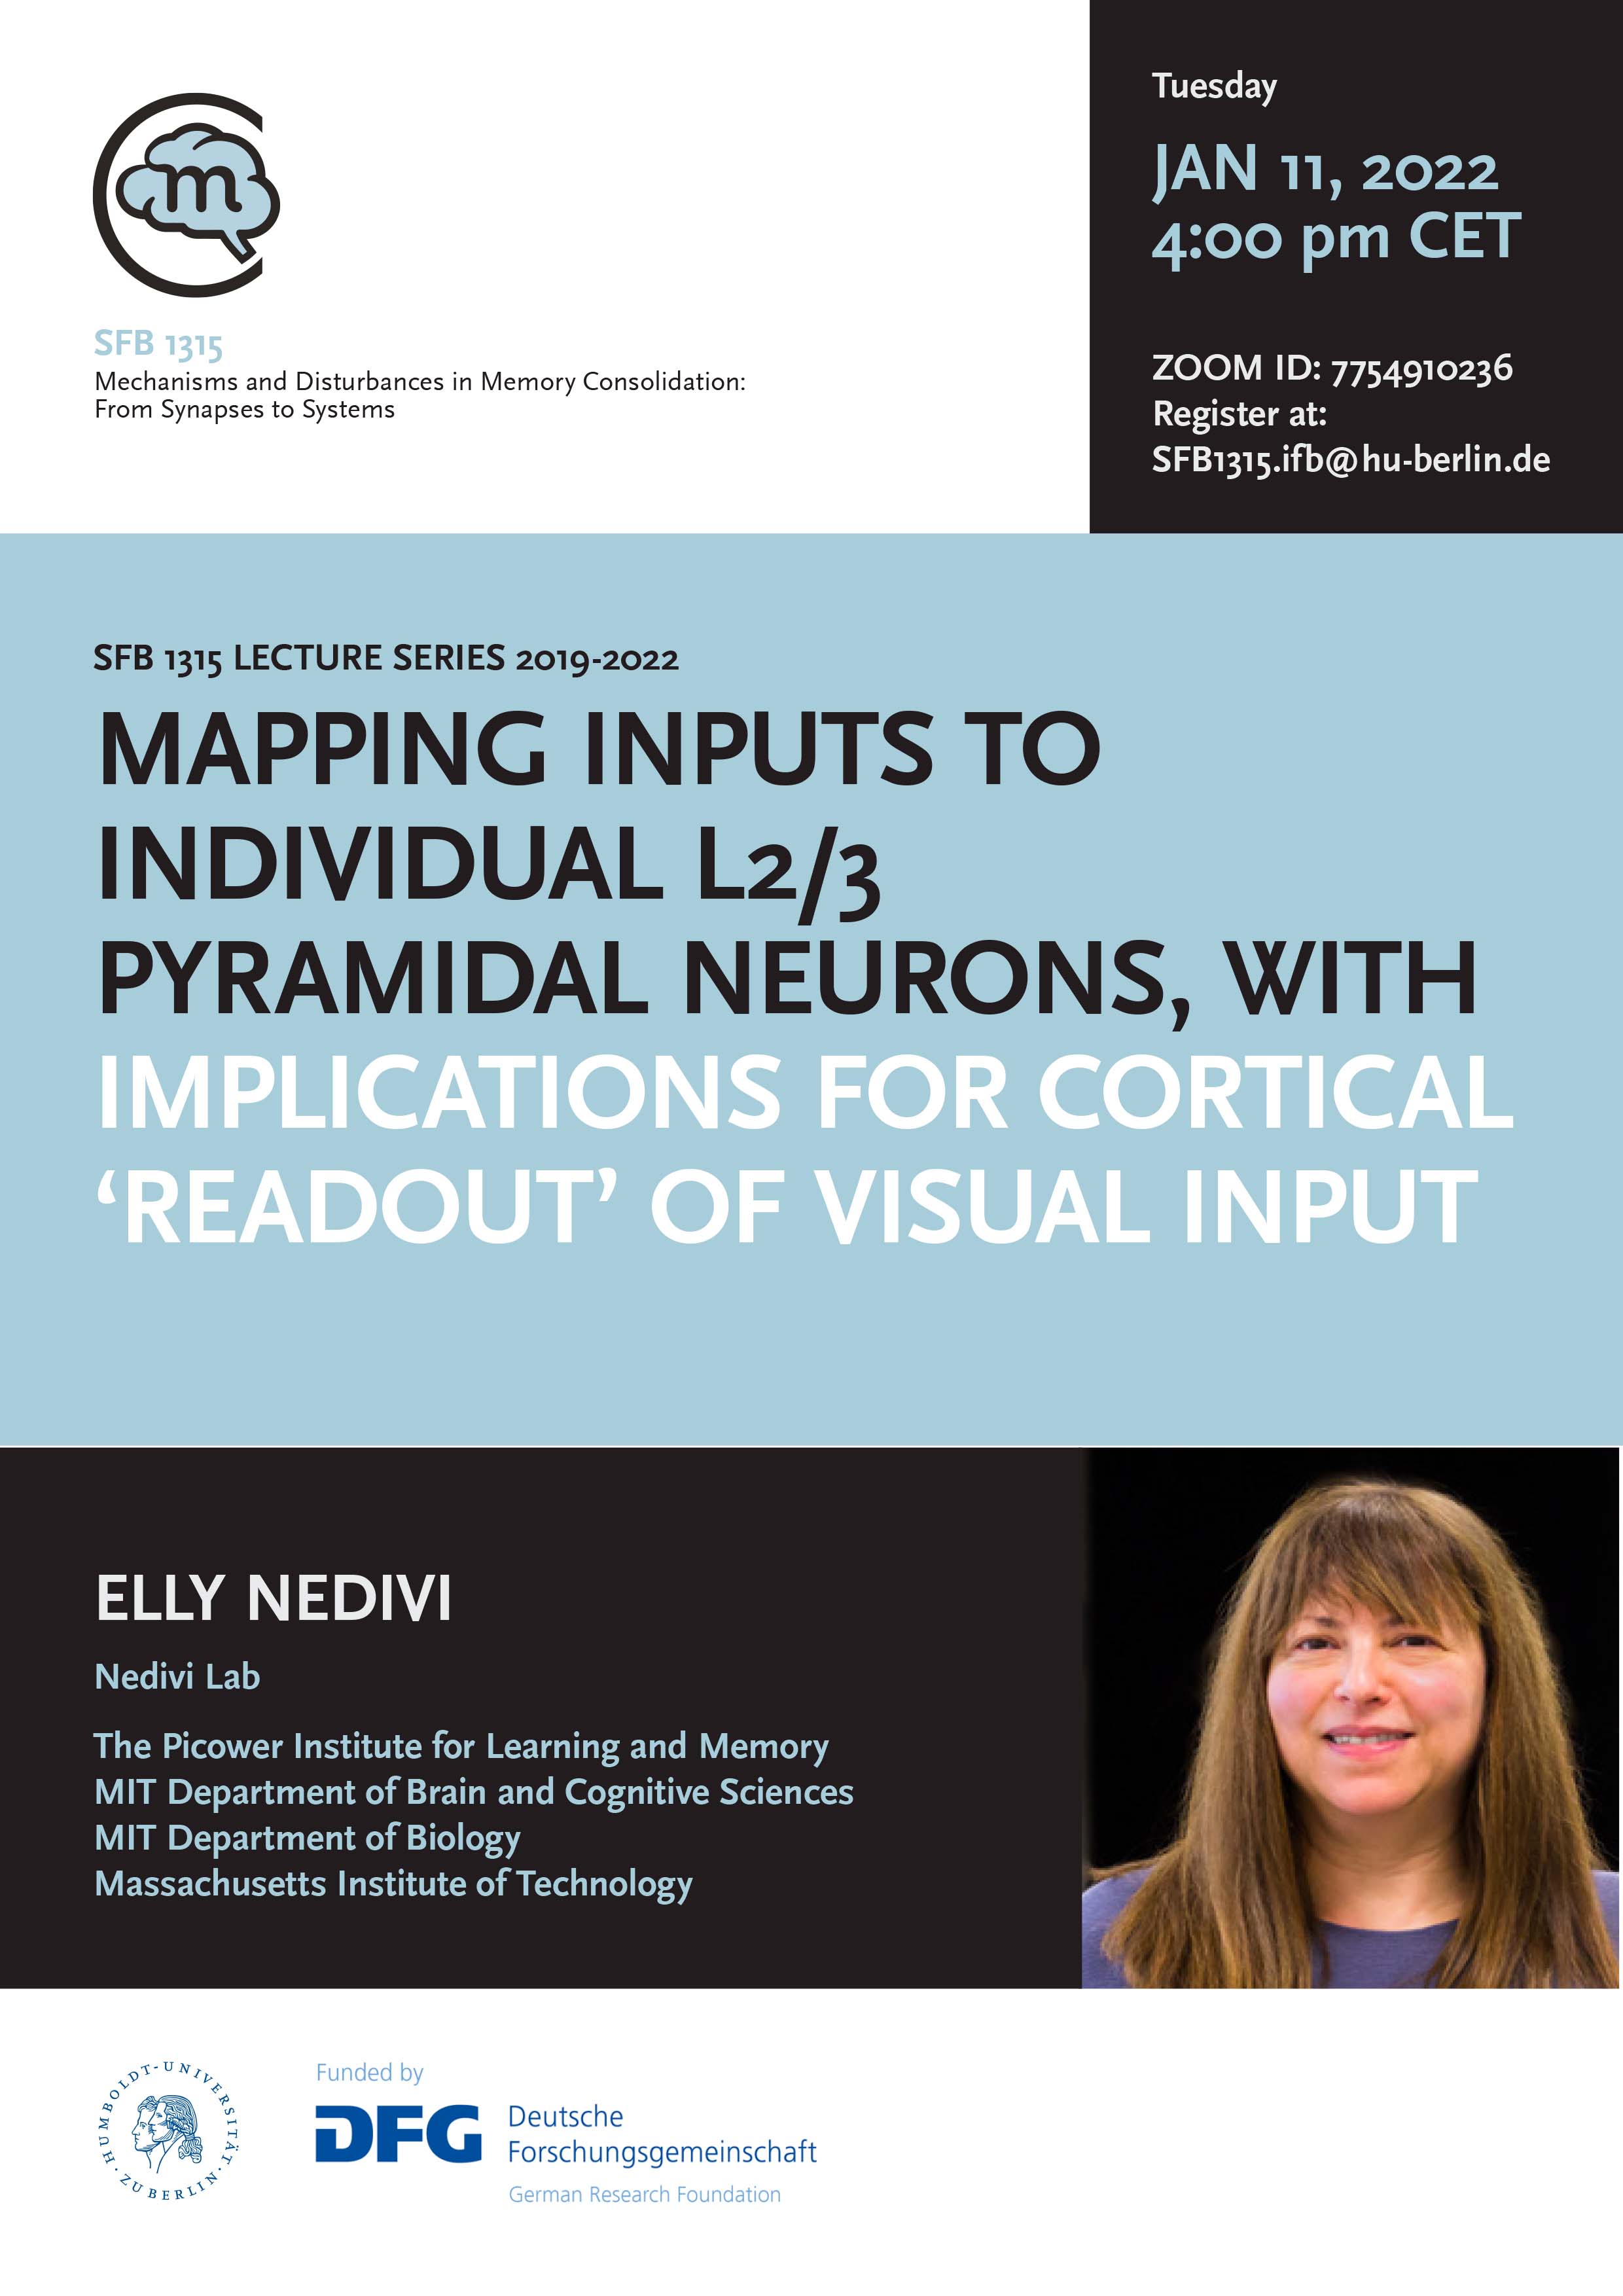 CRC 1315 Lecture: Mapping inputs to individual L2/3 pyramidal neurons, with implications for cortical ‘read out’ of visual input @ online